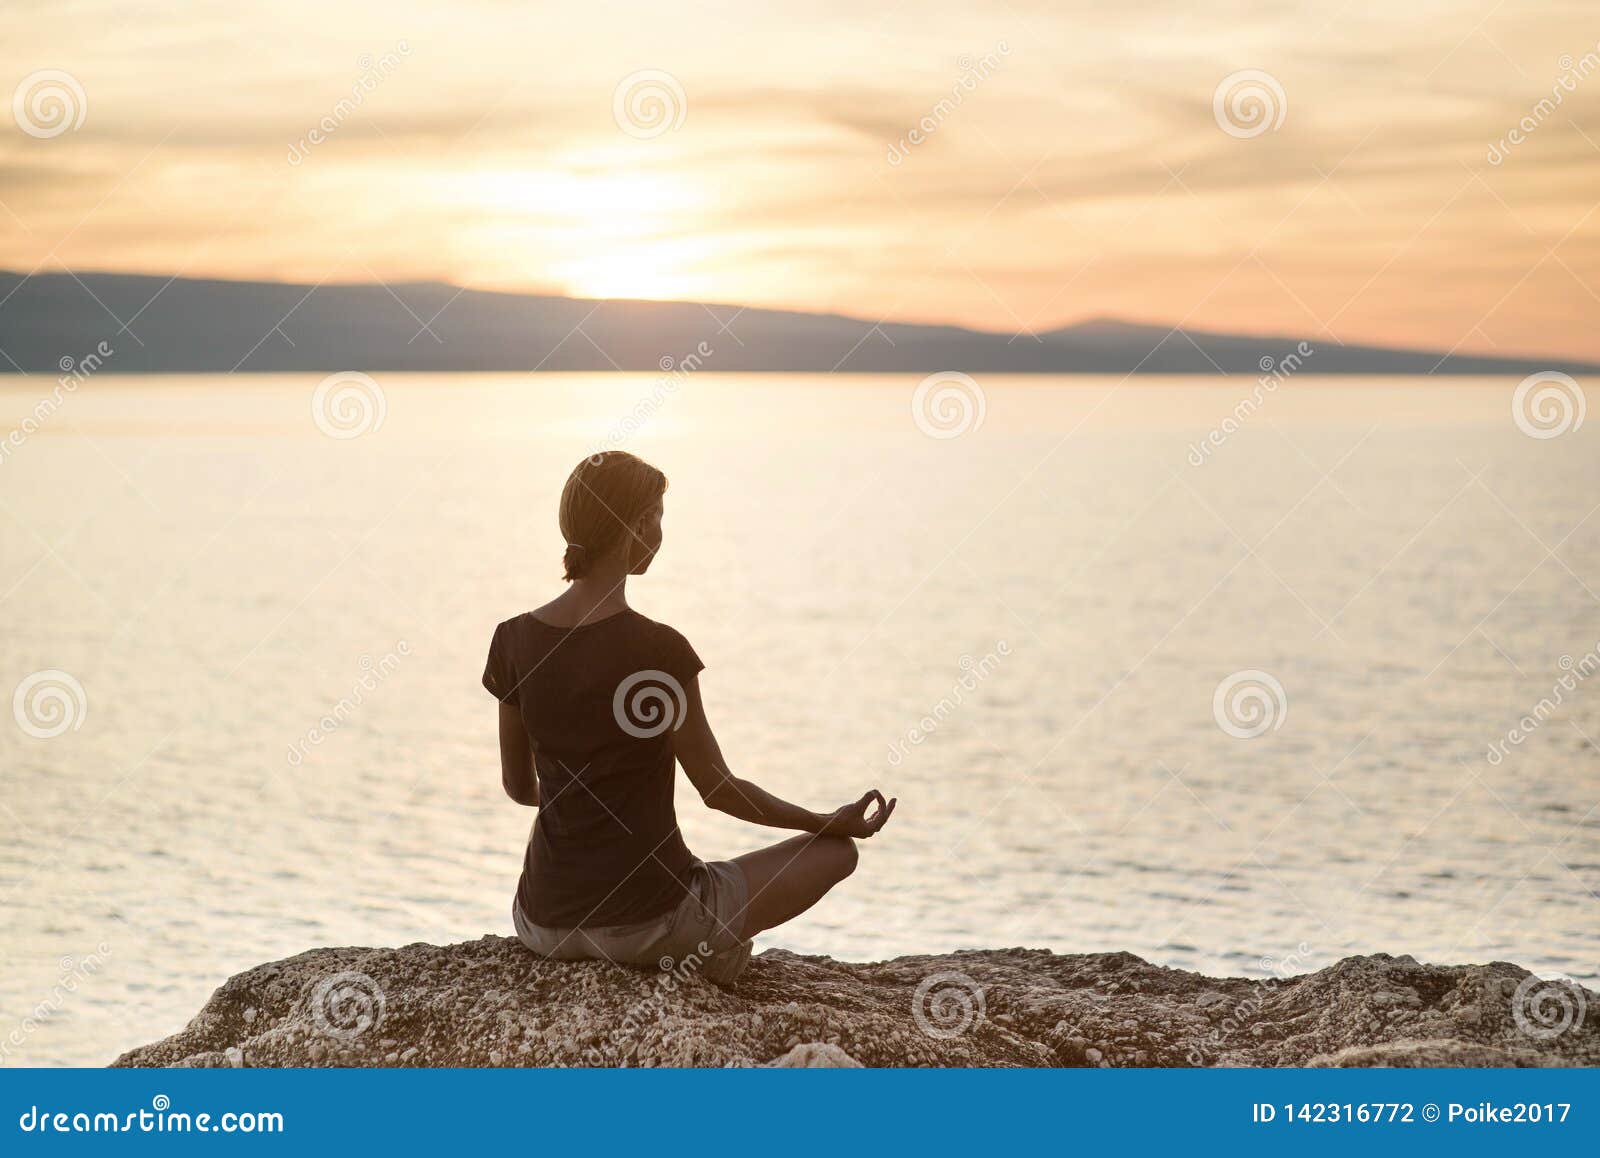 young woman practicing yoga near the sea at sunset. harmony, meditation and travel concept. healthy lifestyle